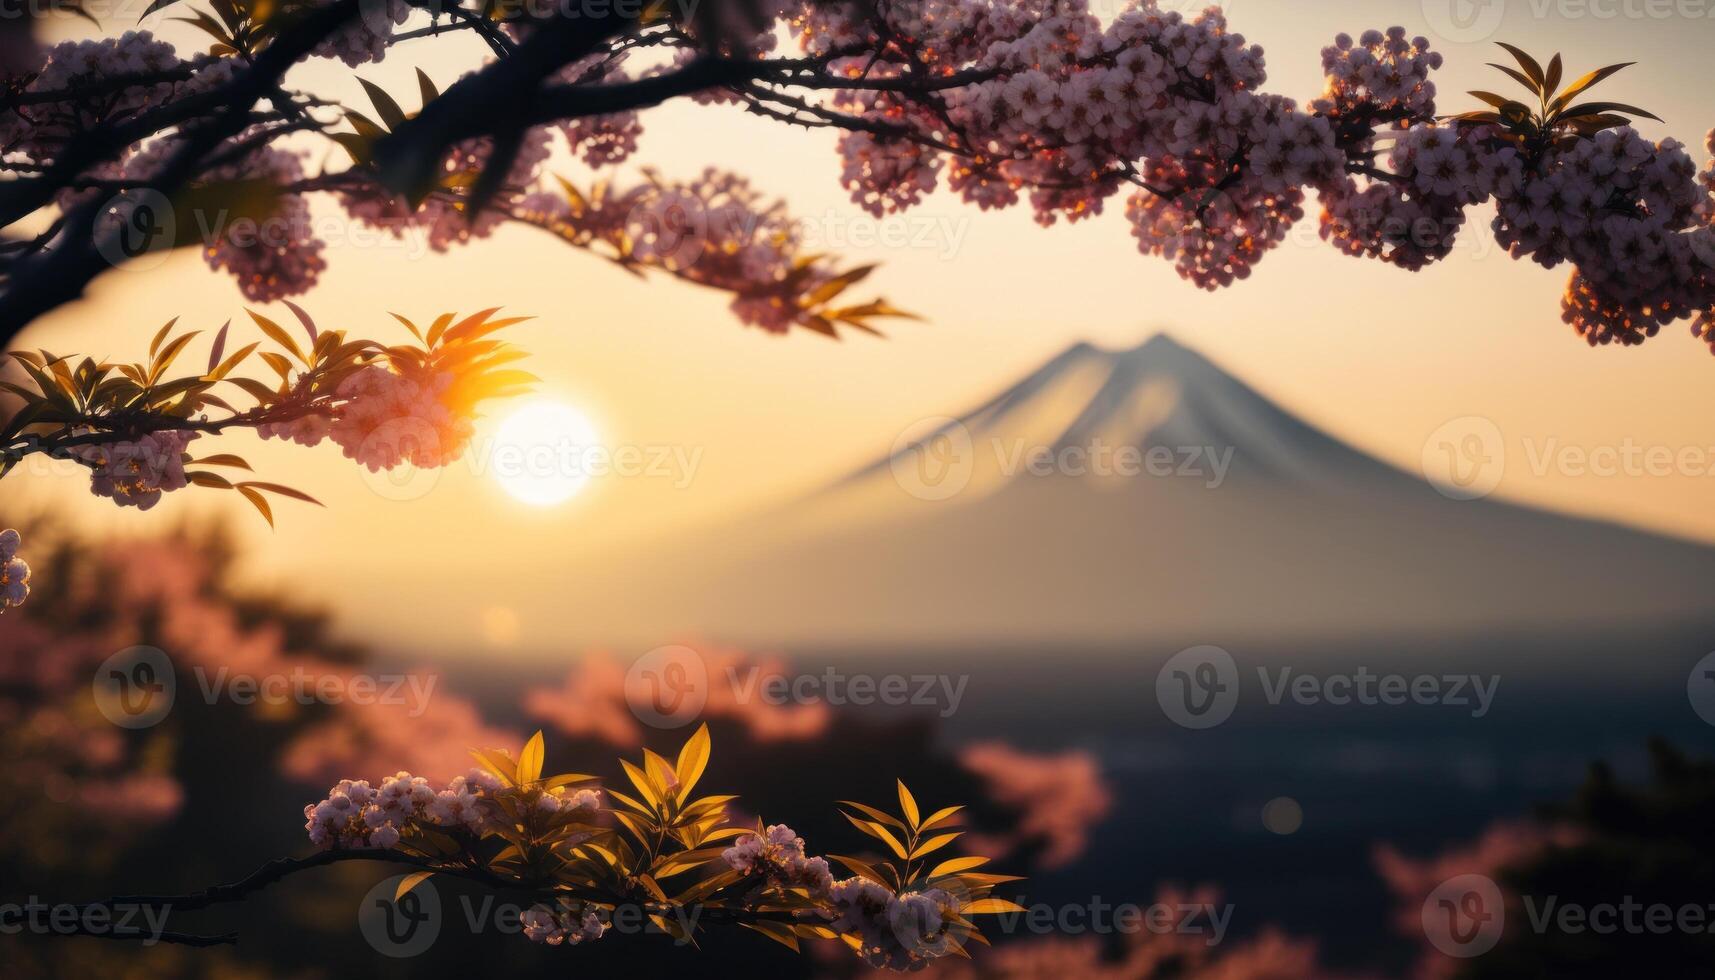 view of Mount Fuji with cherry blossom, and flowers at the lake in japan. Mount Fuji with cherry blossom, flowers at the lake in japan fuji mountain at viewpoint. photo